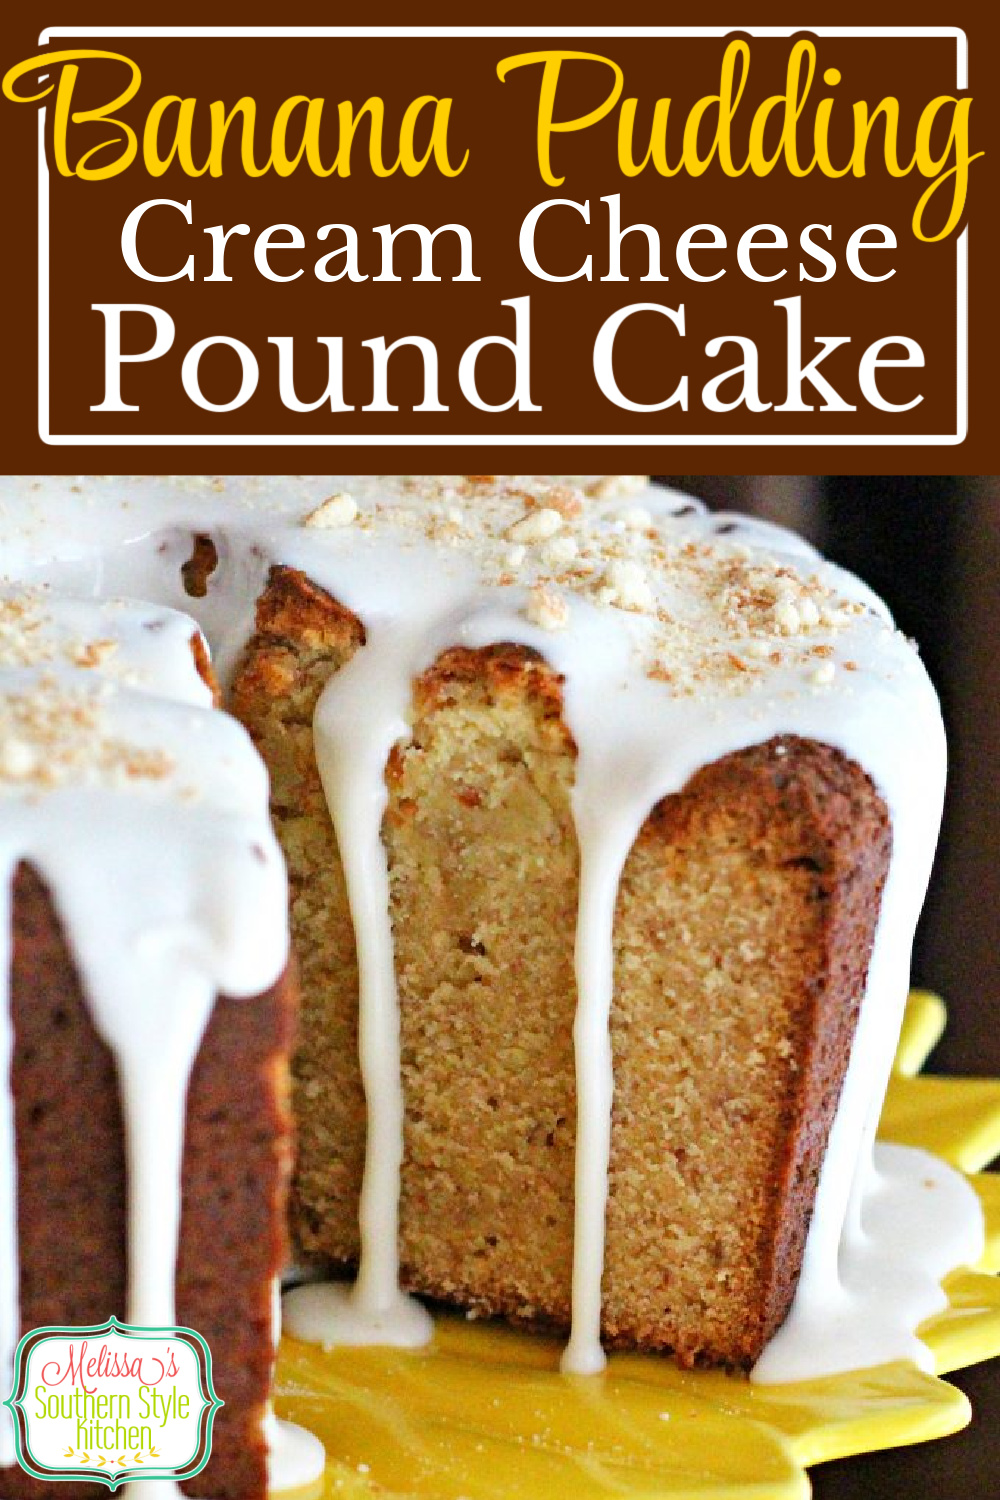 Pound cake and banana pudding collide in this decadent Banana Pudding Cream Cheese Pound Cake #southernpoundcake #bananacake #bananapudding #southerncakes #cakes #poundcakerecipes #bestbananacake #bananapuddingpoundcake #creamcheesepoundcake via @melissasssk